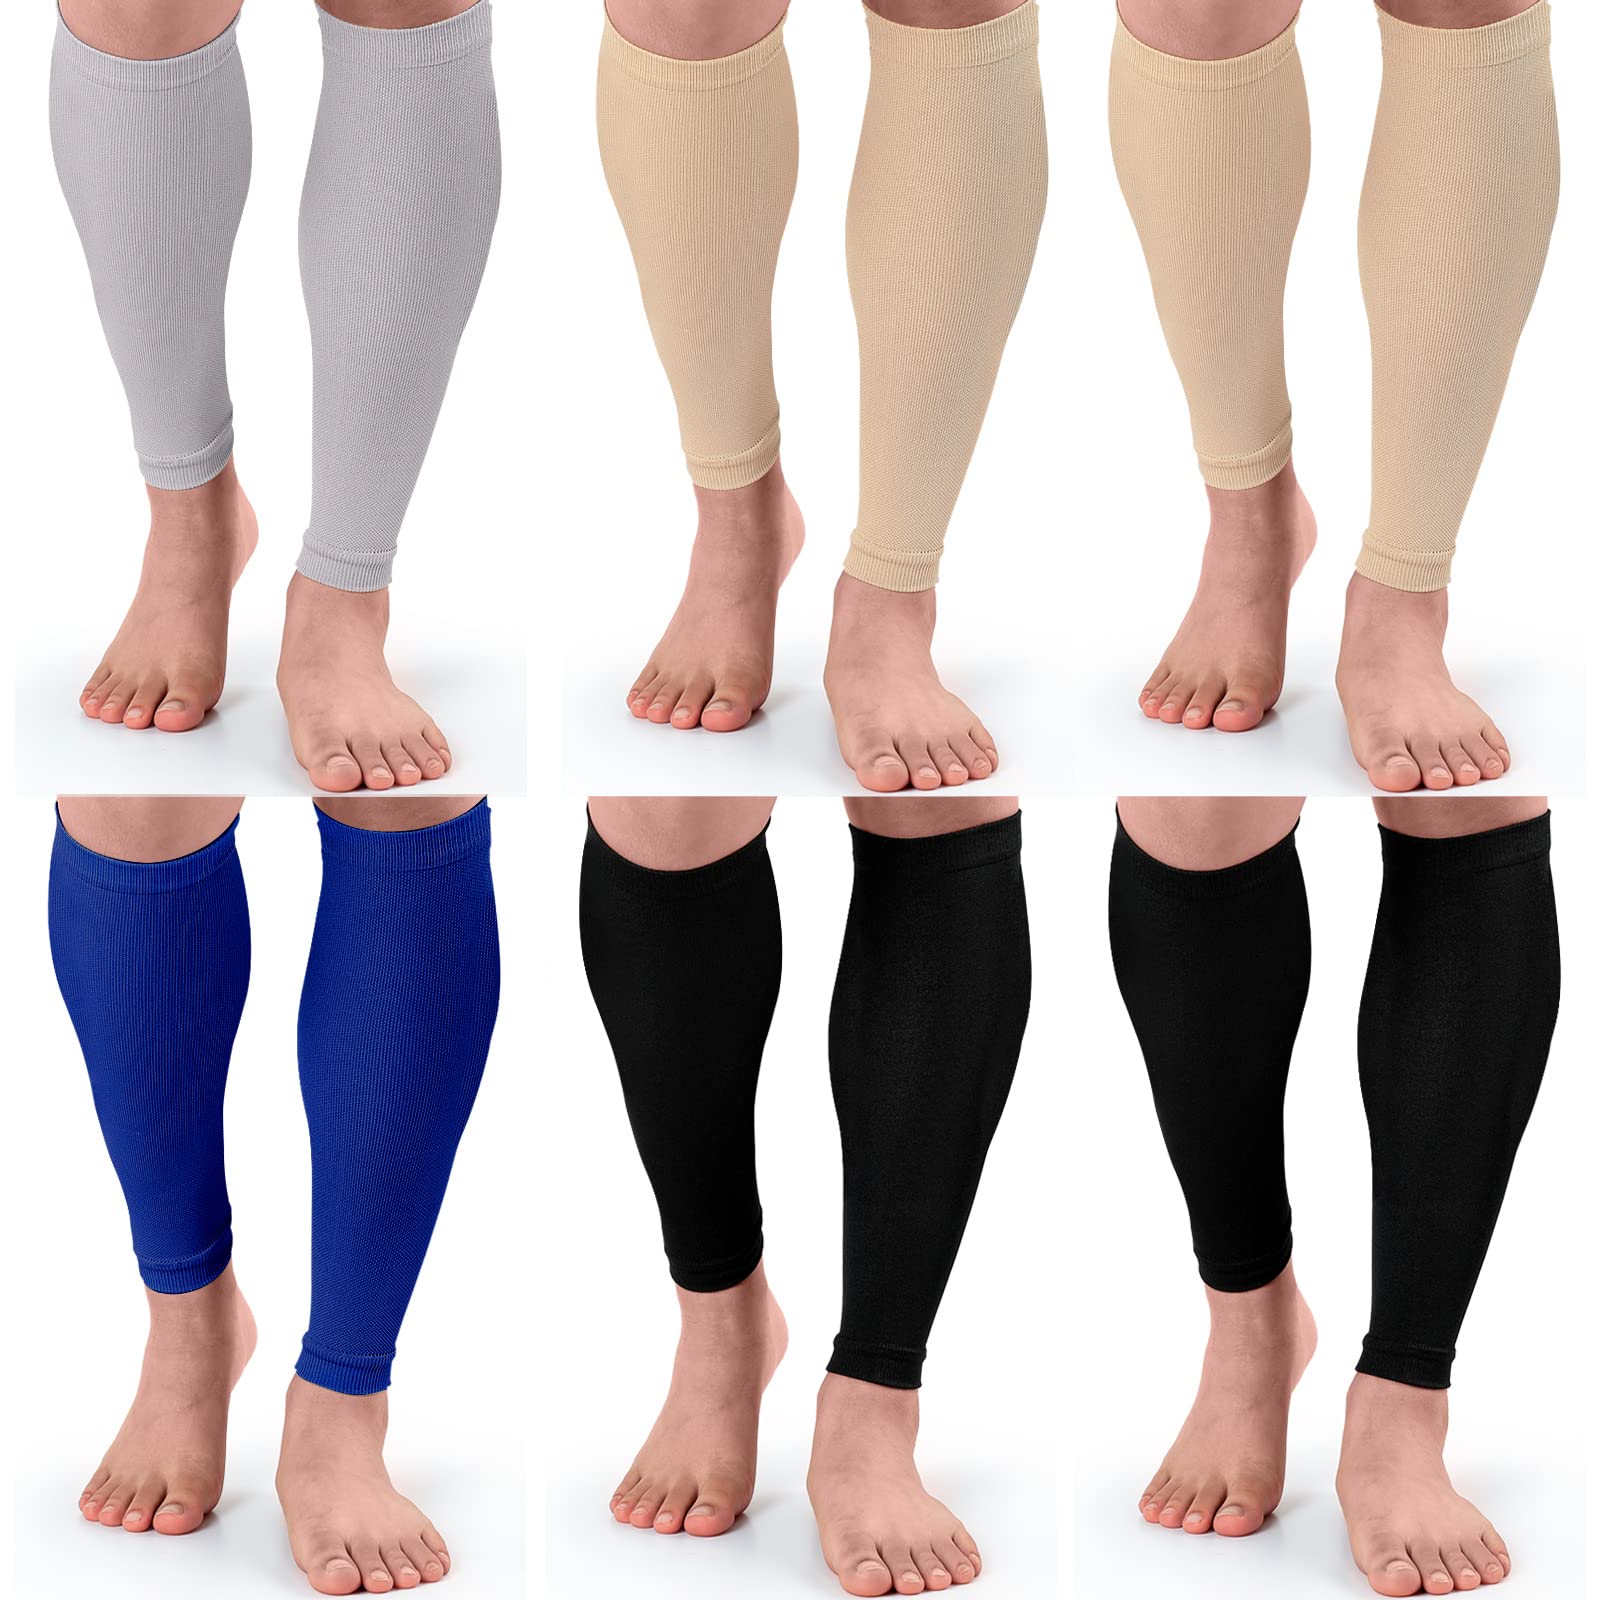  Calf Compression Sleeves for Men and Women - (1 Pair) Footless  Compression Socks Support for Varicose Vein, Nursing, Pregnancy, Running -  PhysFlex Leg Sleeve Brace for Shin Splints, Pain Relief and 